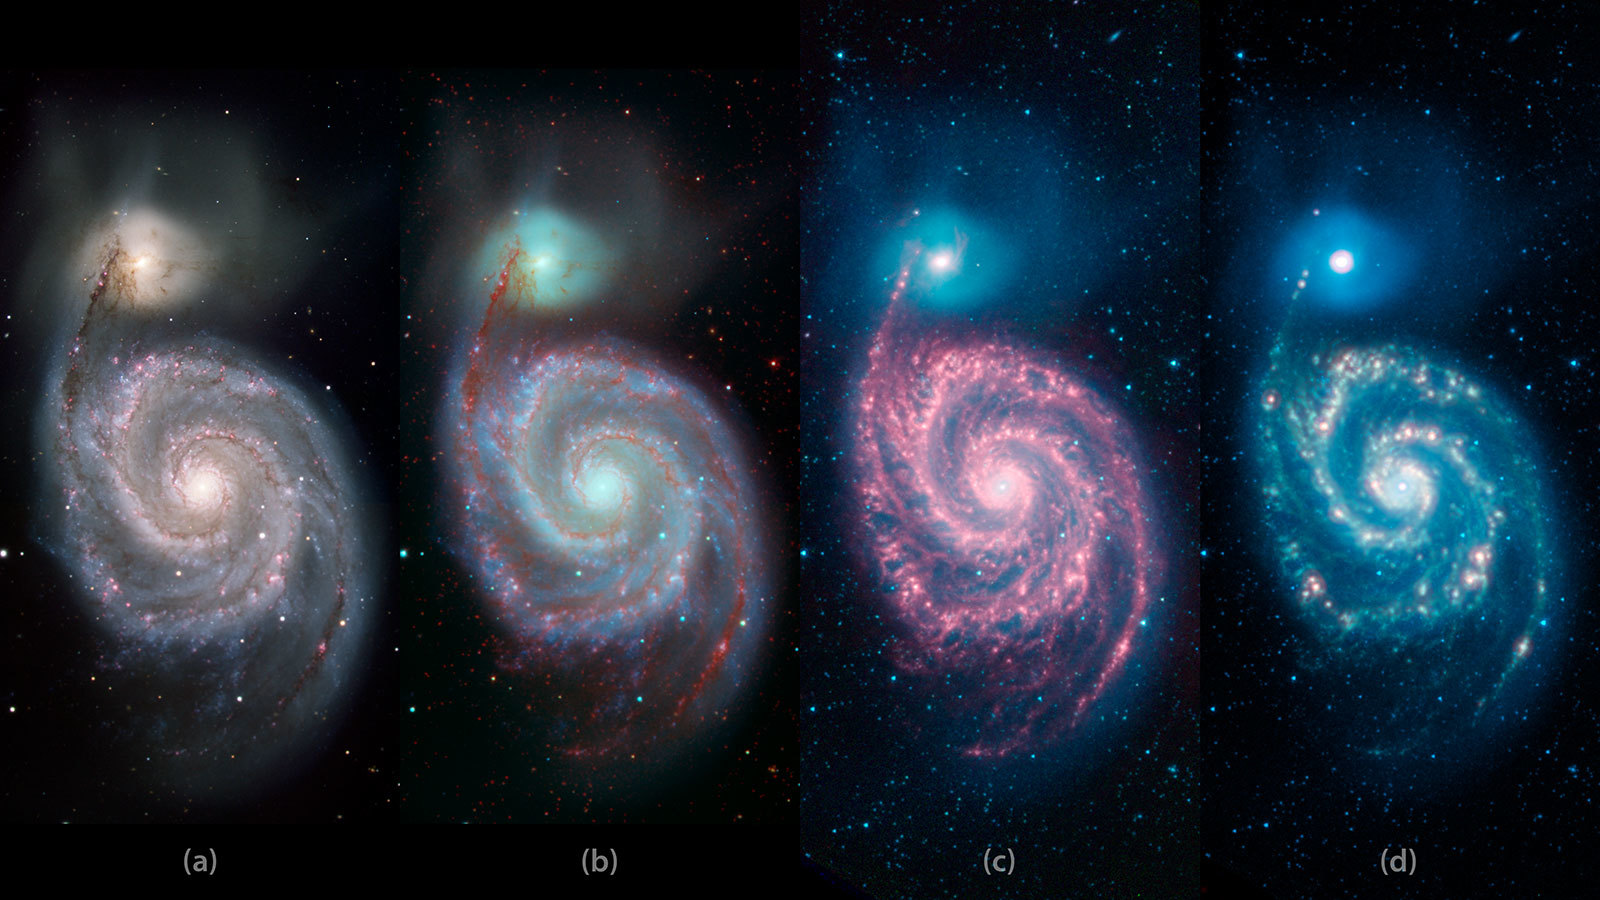 Series of four images showing a whirlpool-shaped galaxy in various wavelengths of light.